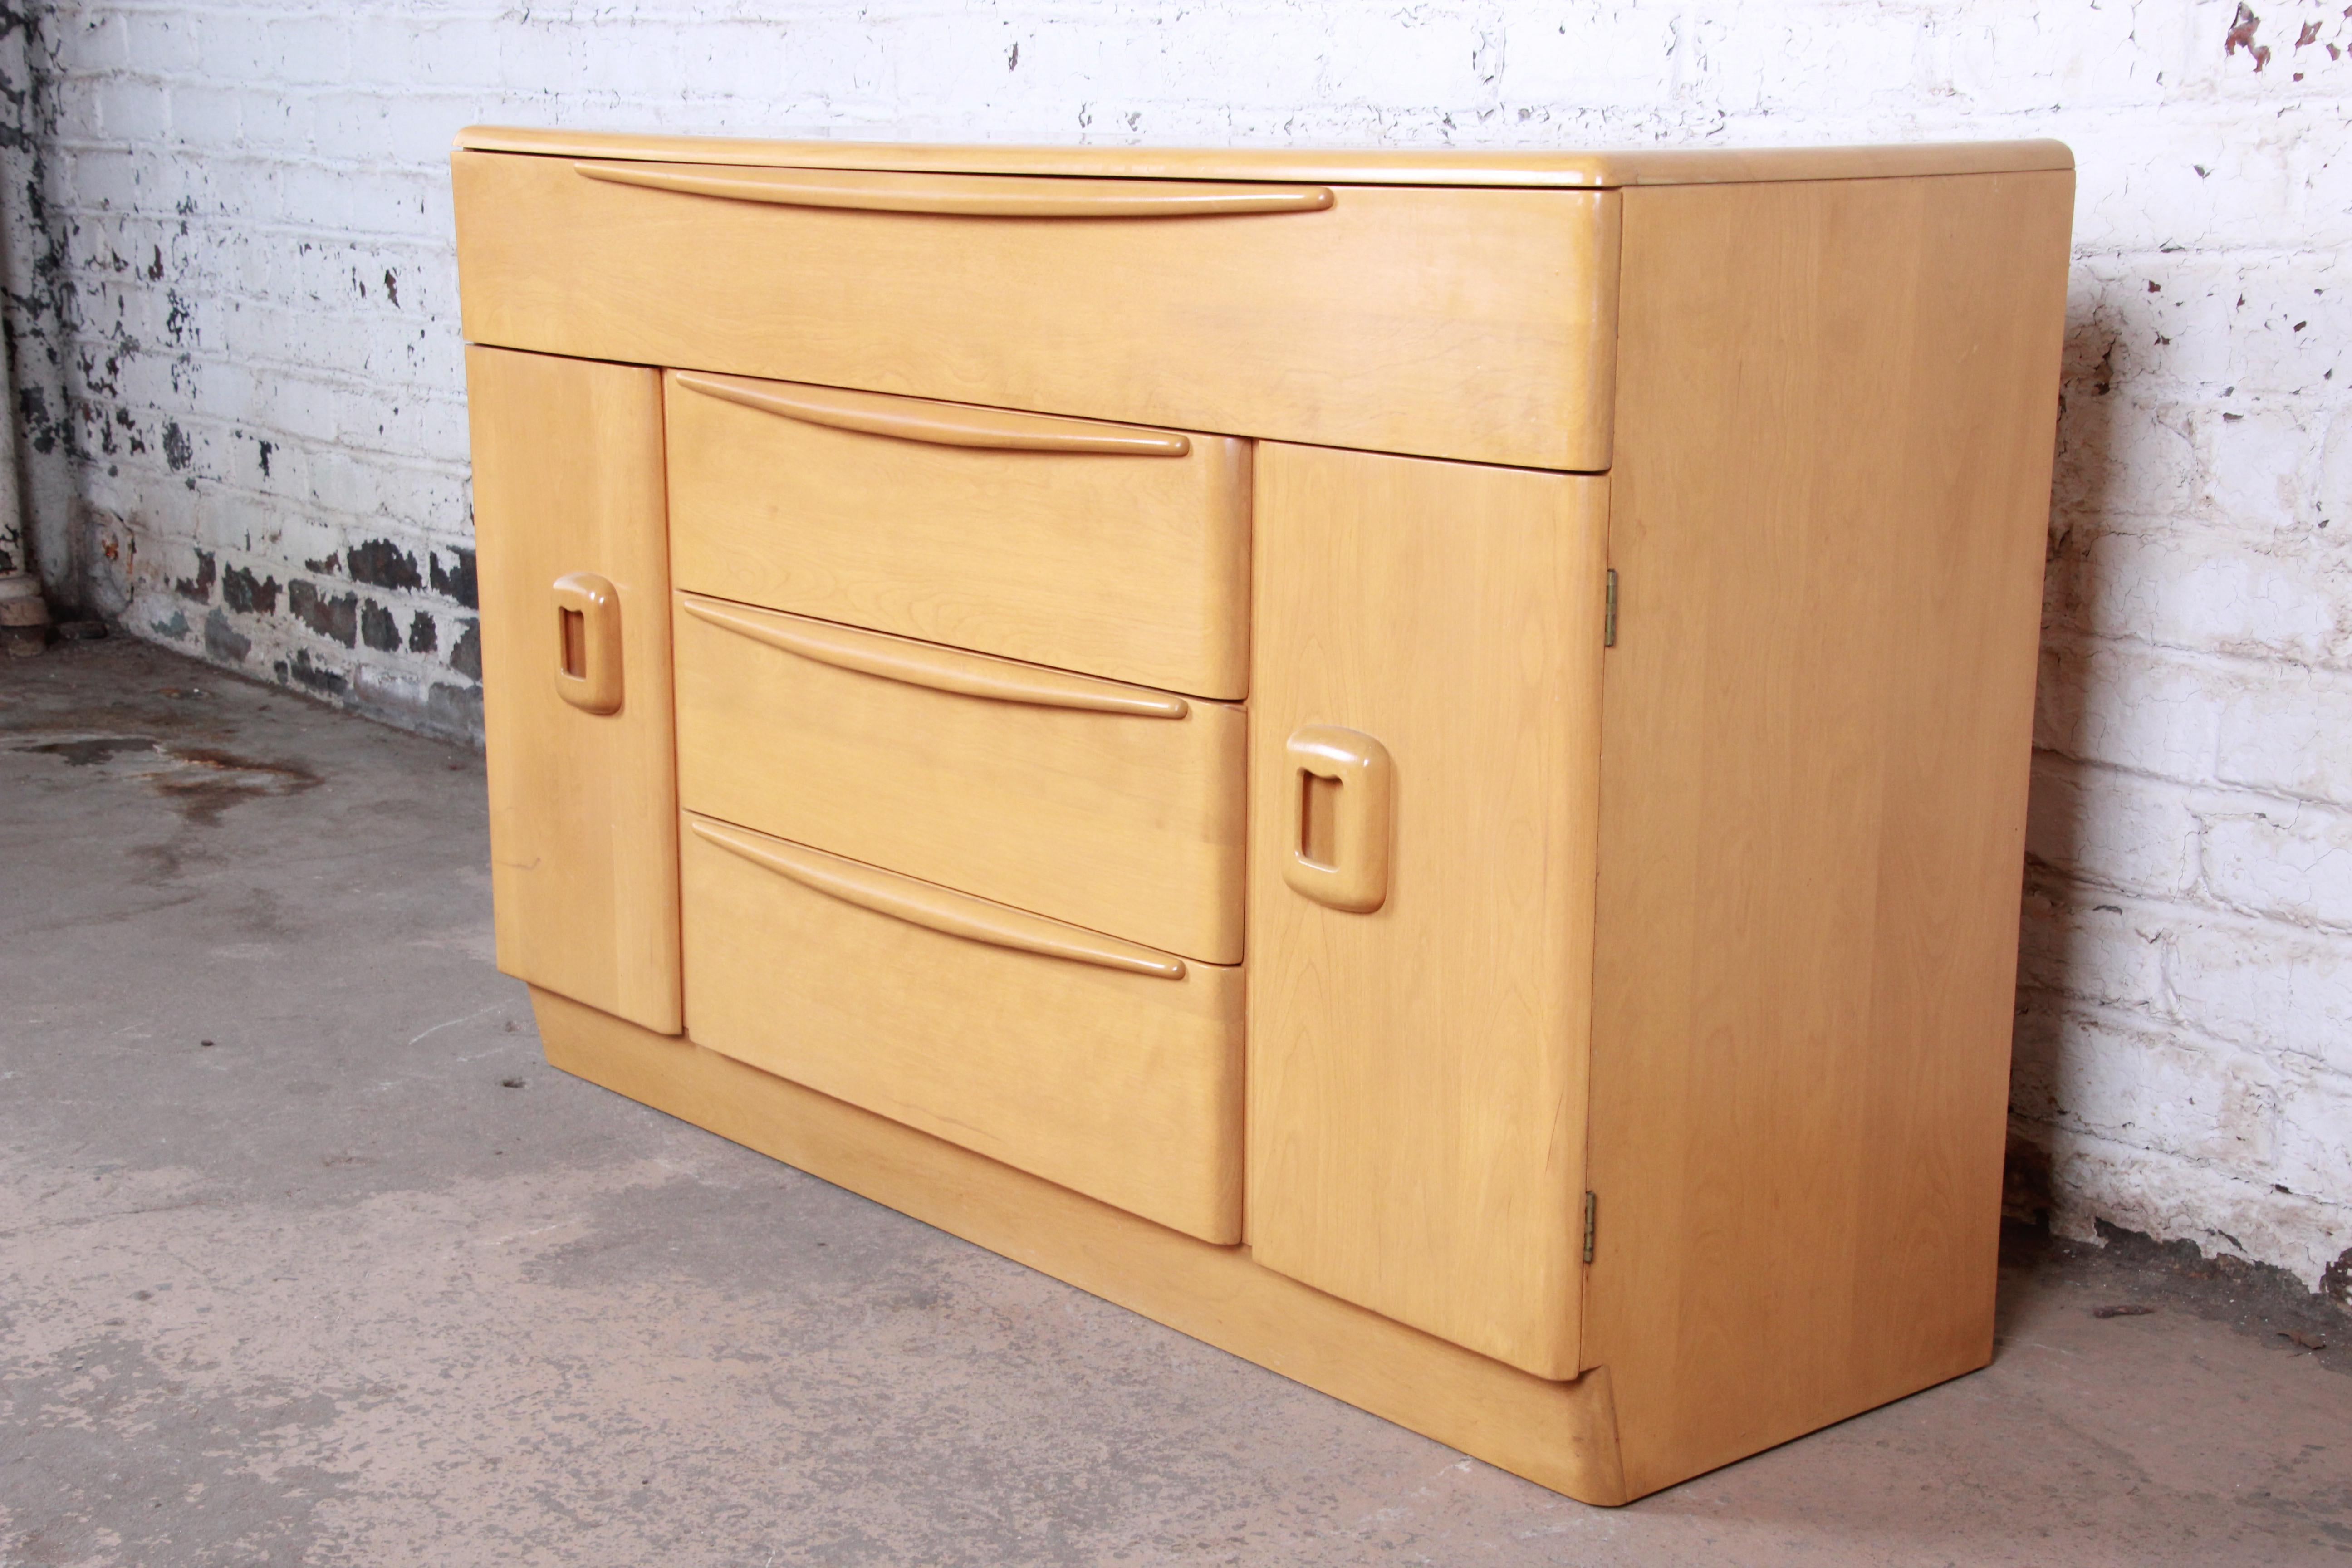 A very nice Mid-Century Modern sideboard or credenza by Heywood Wakefield. The sideboard features solid maple construction and sleek midcentury design. It offers ample storage, with a very long drawer at the top, three additional drawers in the